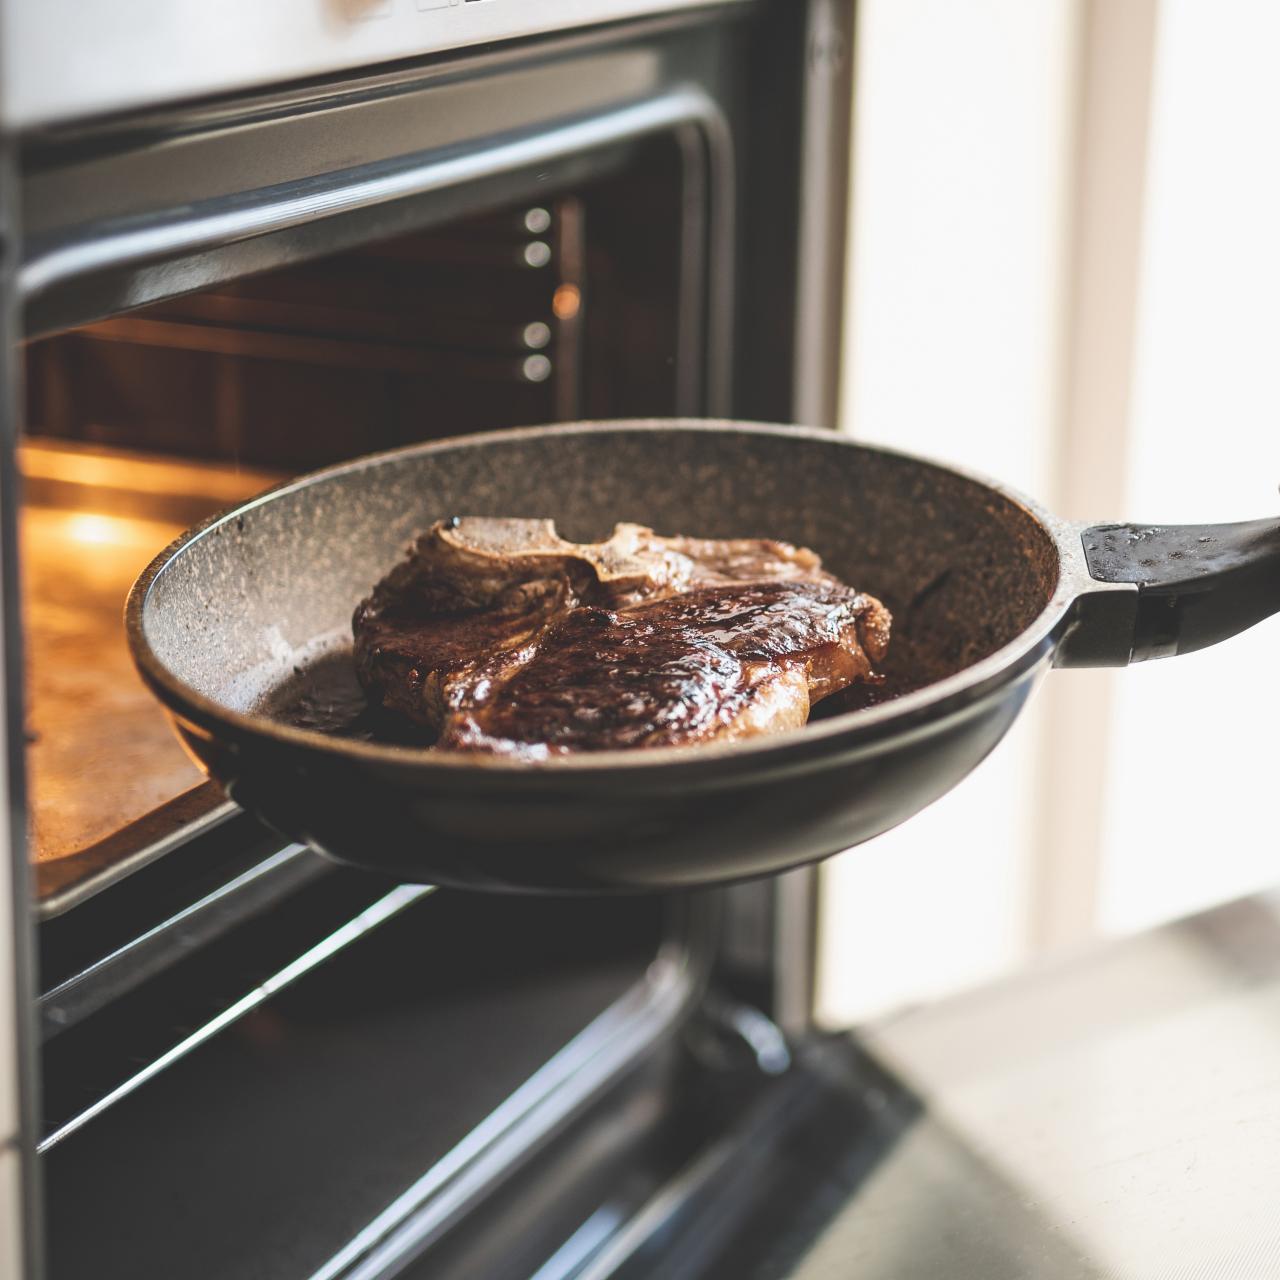 How to Cook Steak in a Frying Pan: 8 Easy Steps